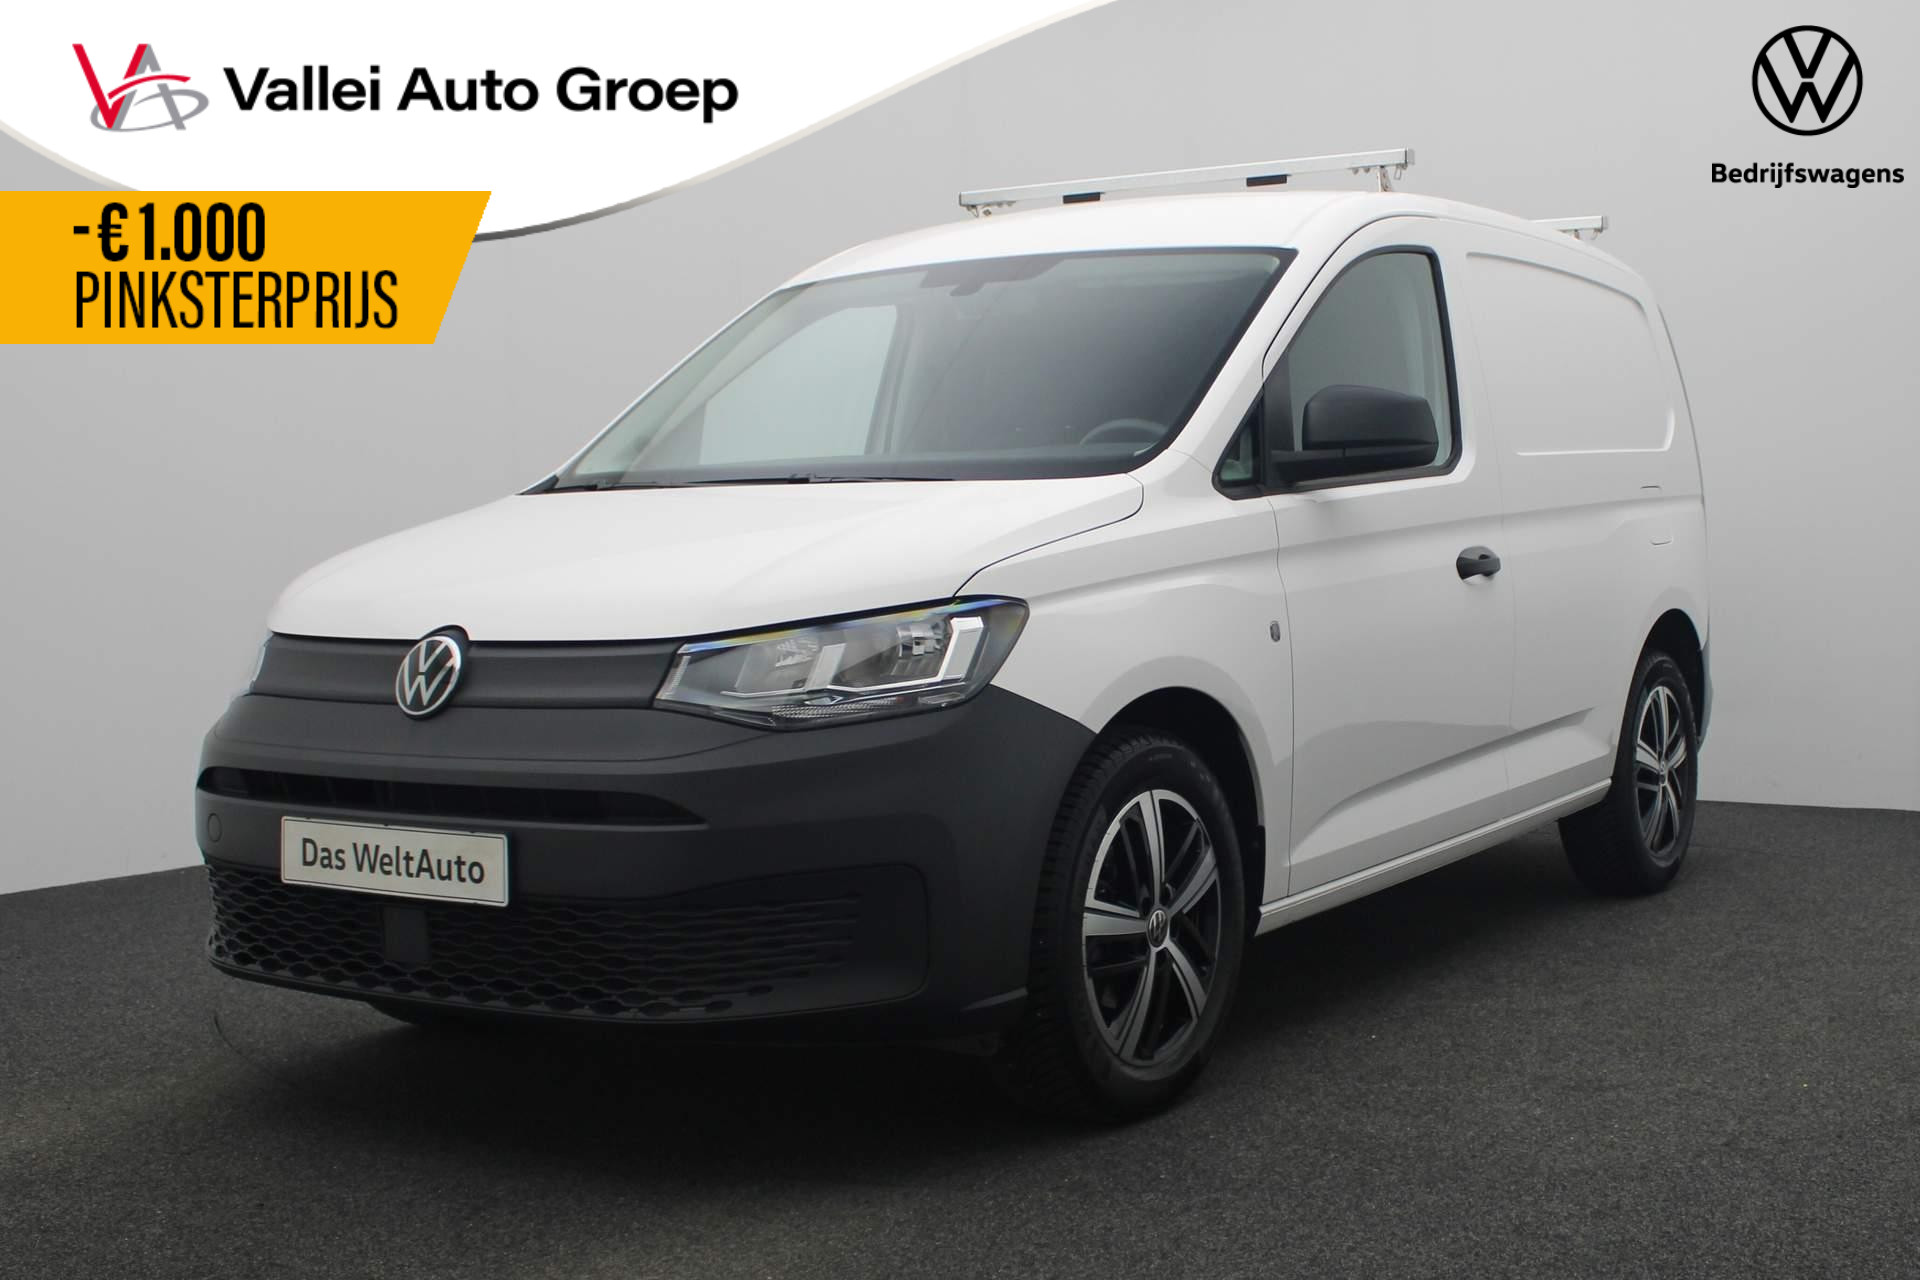 Volkswagen Caddy Cargo 2.0 TDI 75PK Comfort | 17 inch | Airco | Cruise | Apple Carplay / Android Auto | Dakdragers